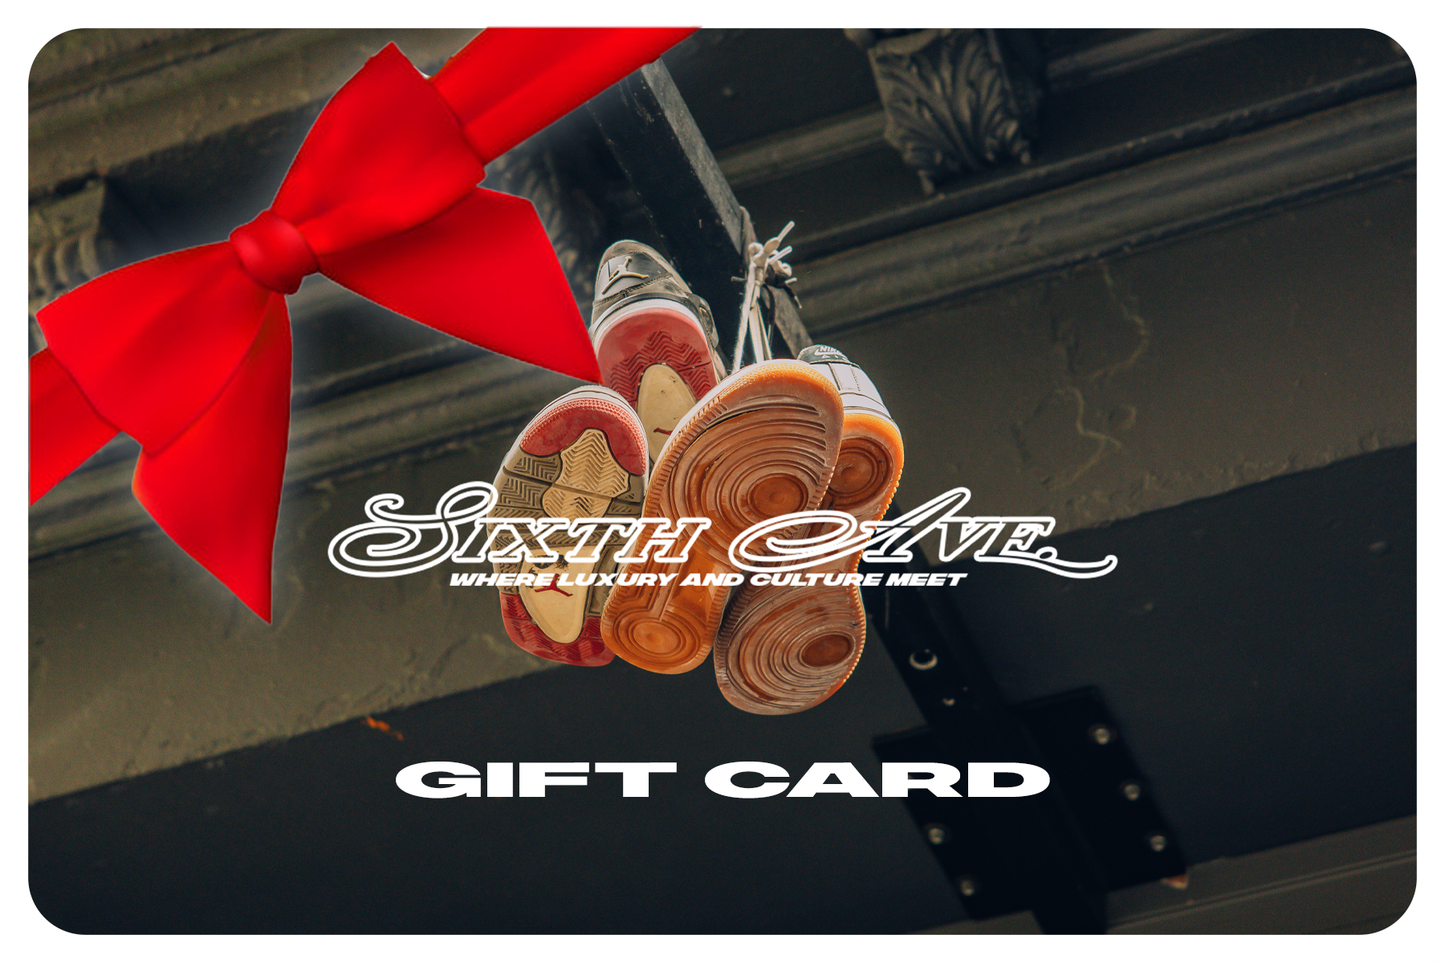 Sixth Ave Gift Card